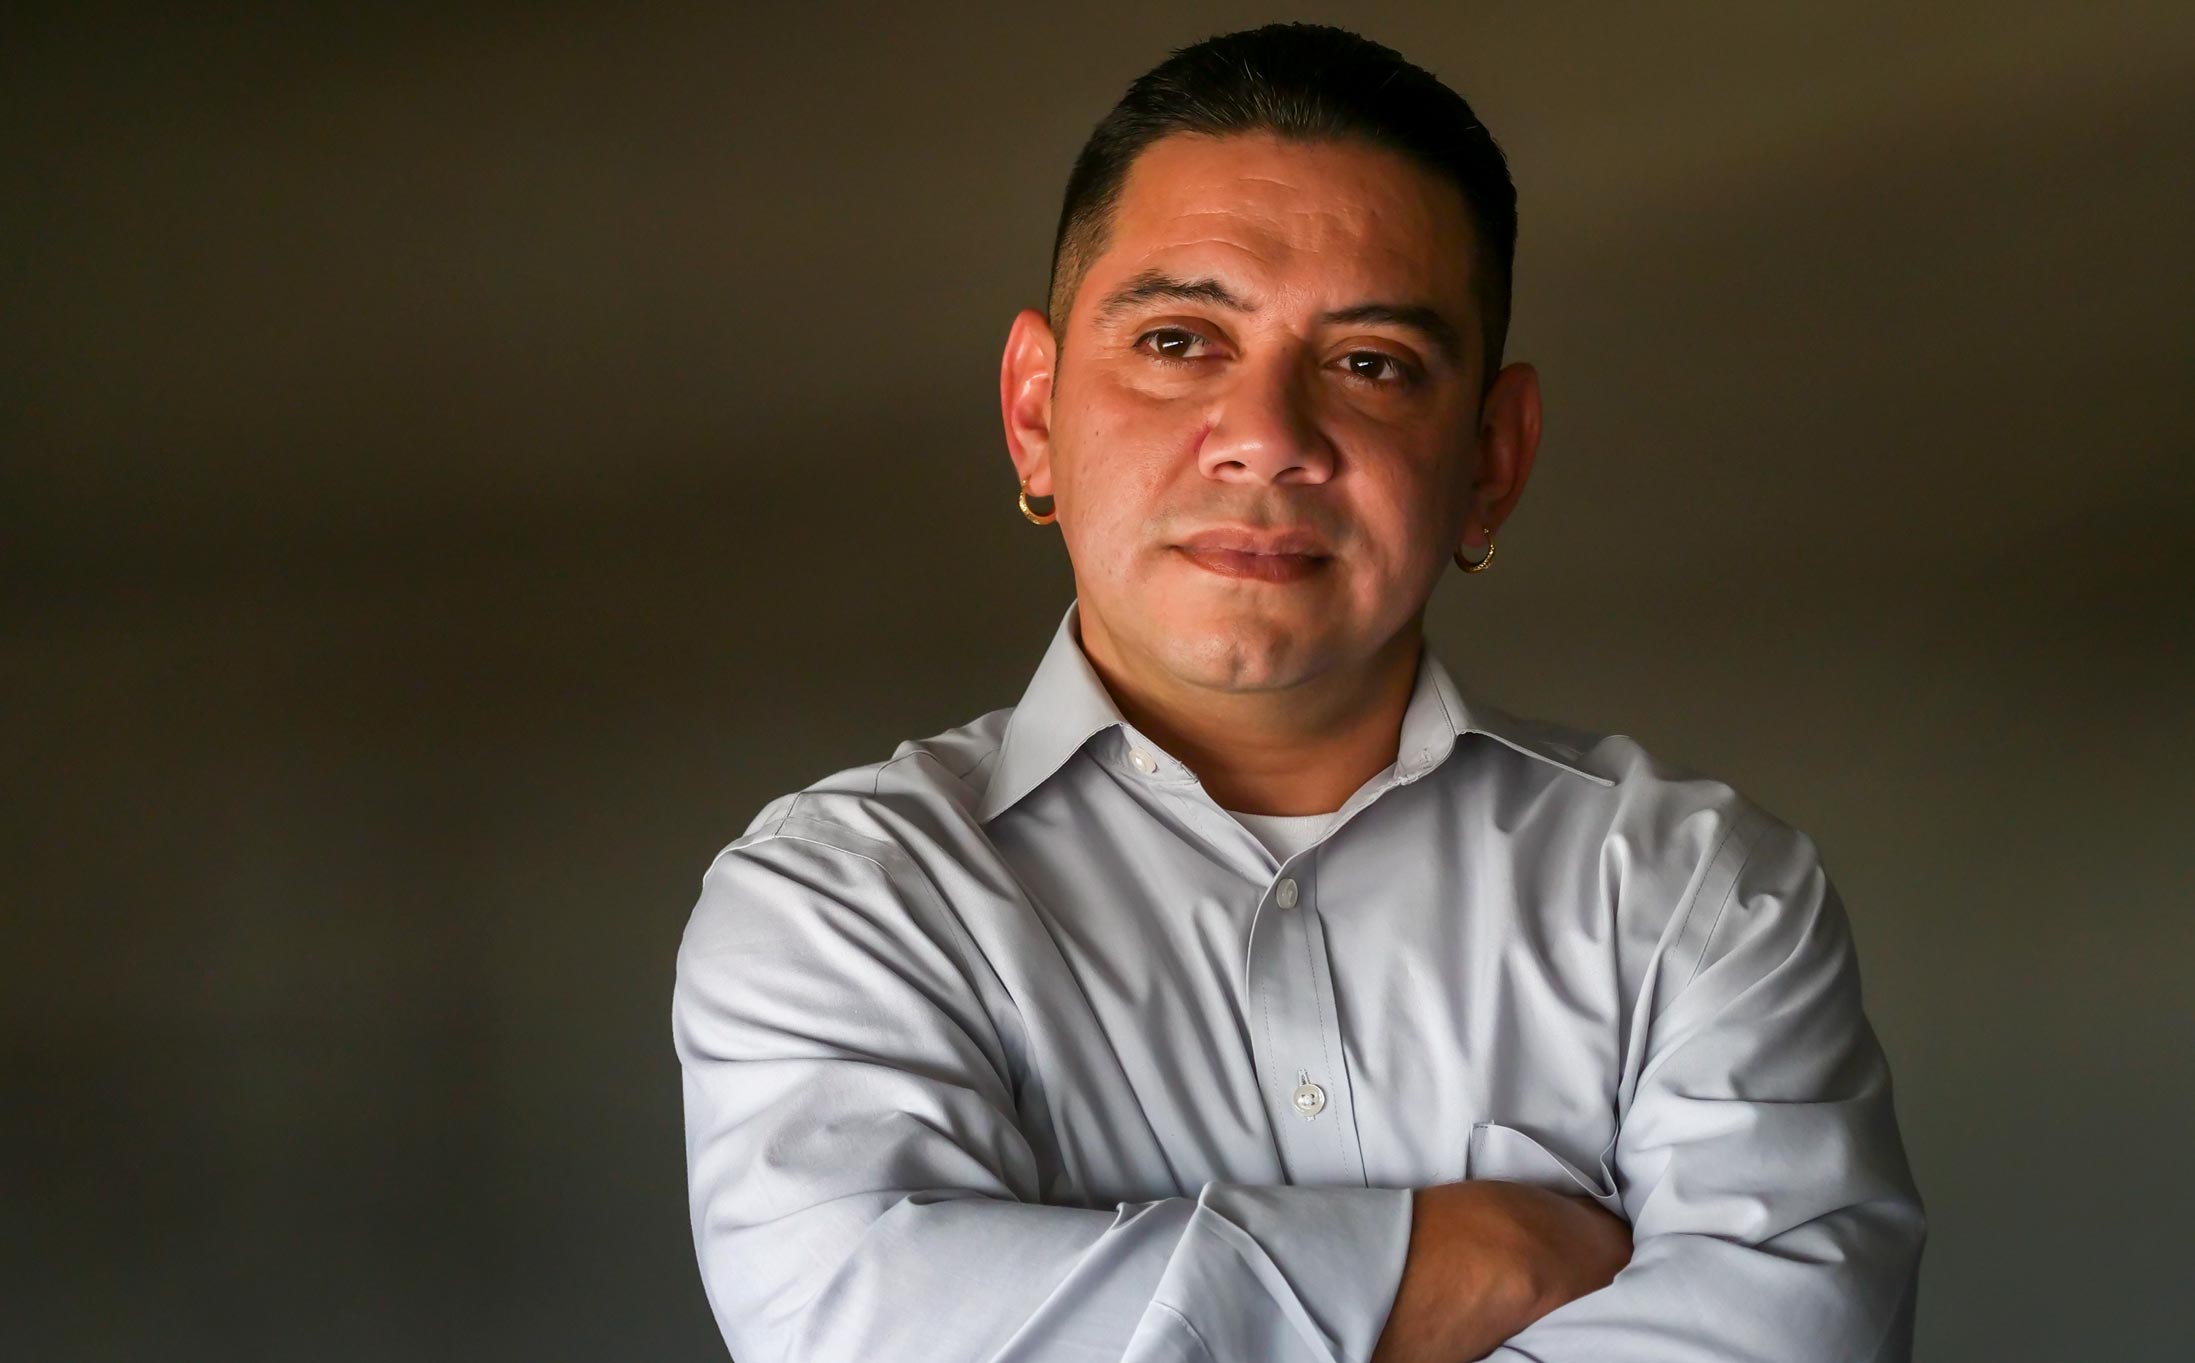 Exoneree Clemente Aguirre. (Image: Lacy Atkins/Innocence Project)